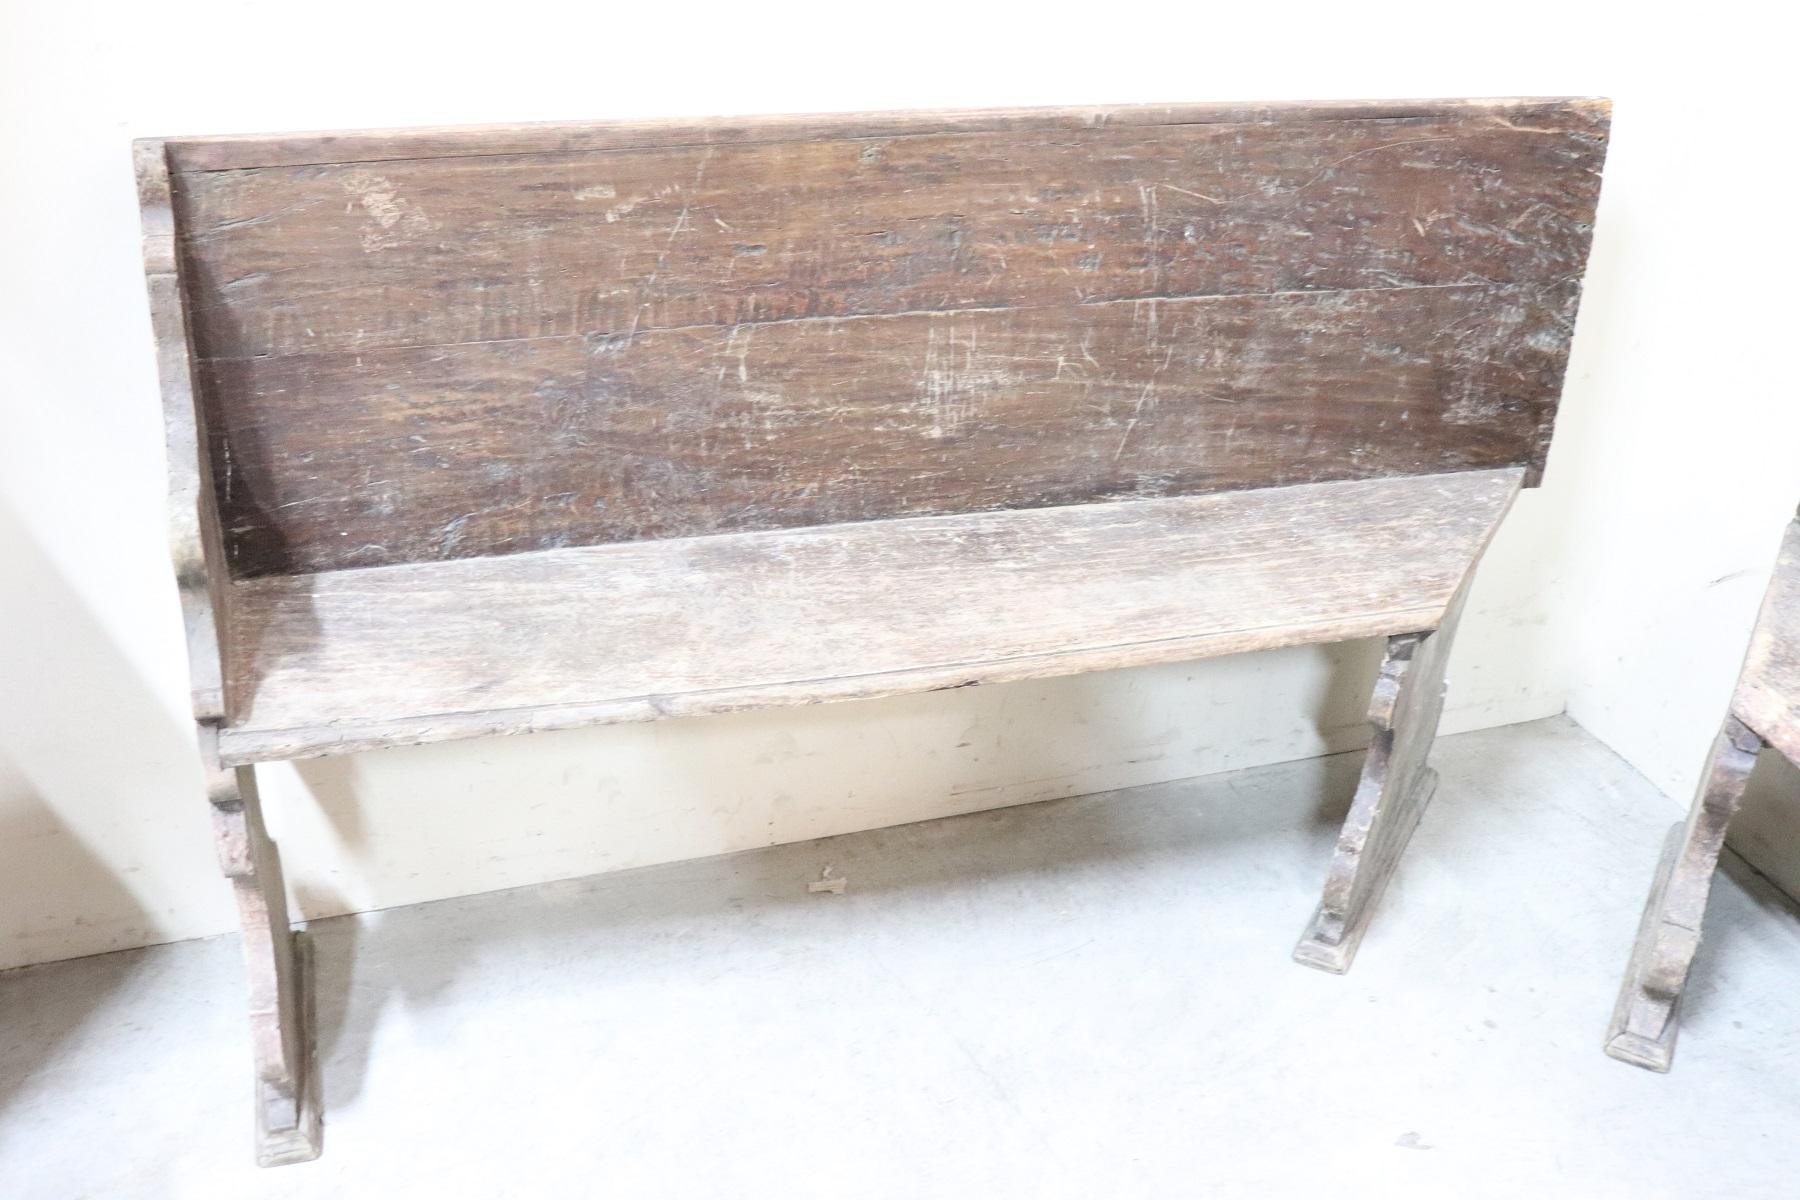 Rare Italian corner bench 1750s. Made of solid walnut wood. The bench is made up of two pieces. The length of the two pieces is 170 cm on one side and 117 cm on the other side. The bench shows signs related to the wear and tear of all the past